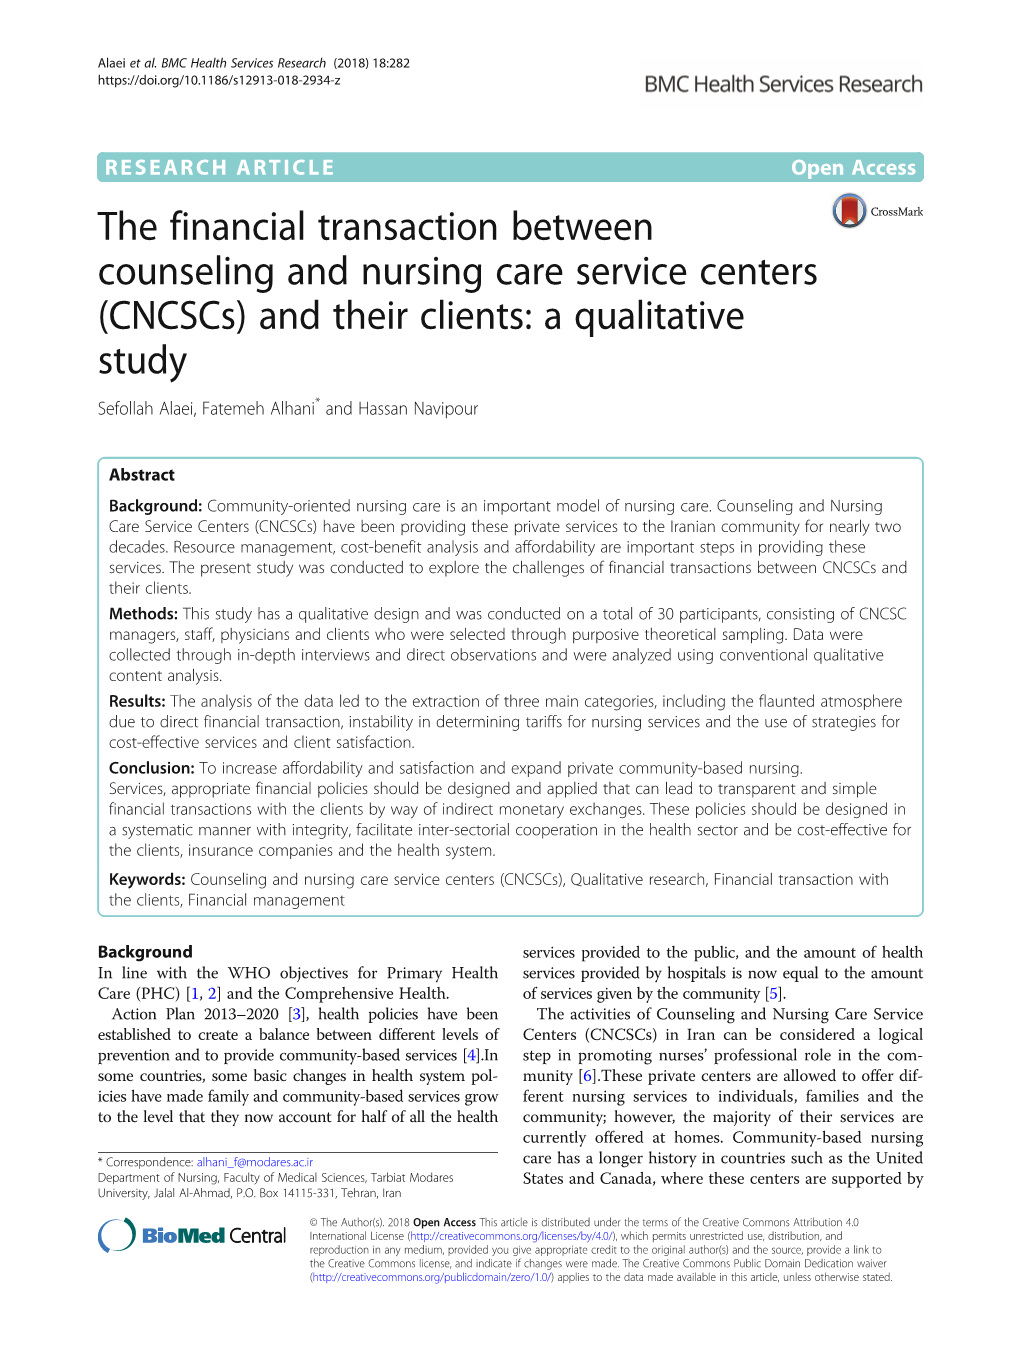 (Cncscs) and Their Clients: a Qualitative Study Sefollah Alaei, Fatemeh Alhani* and Hassan Navipour